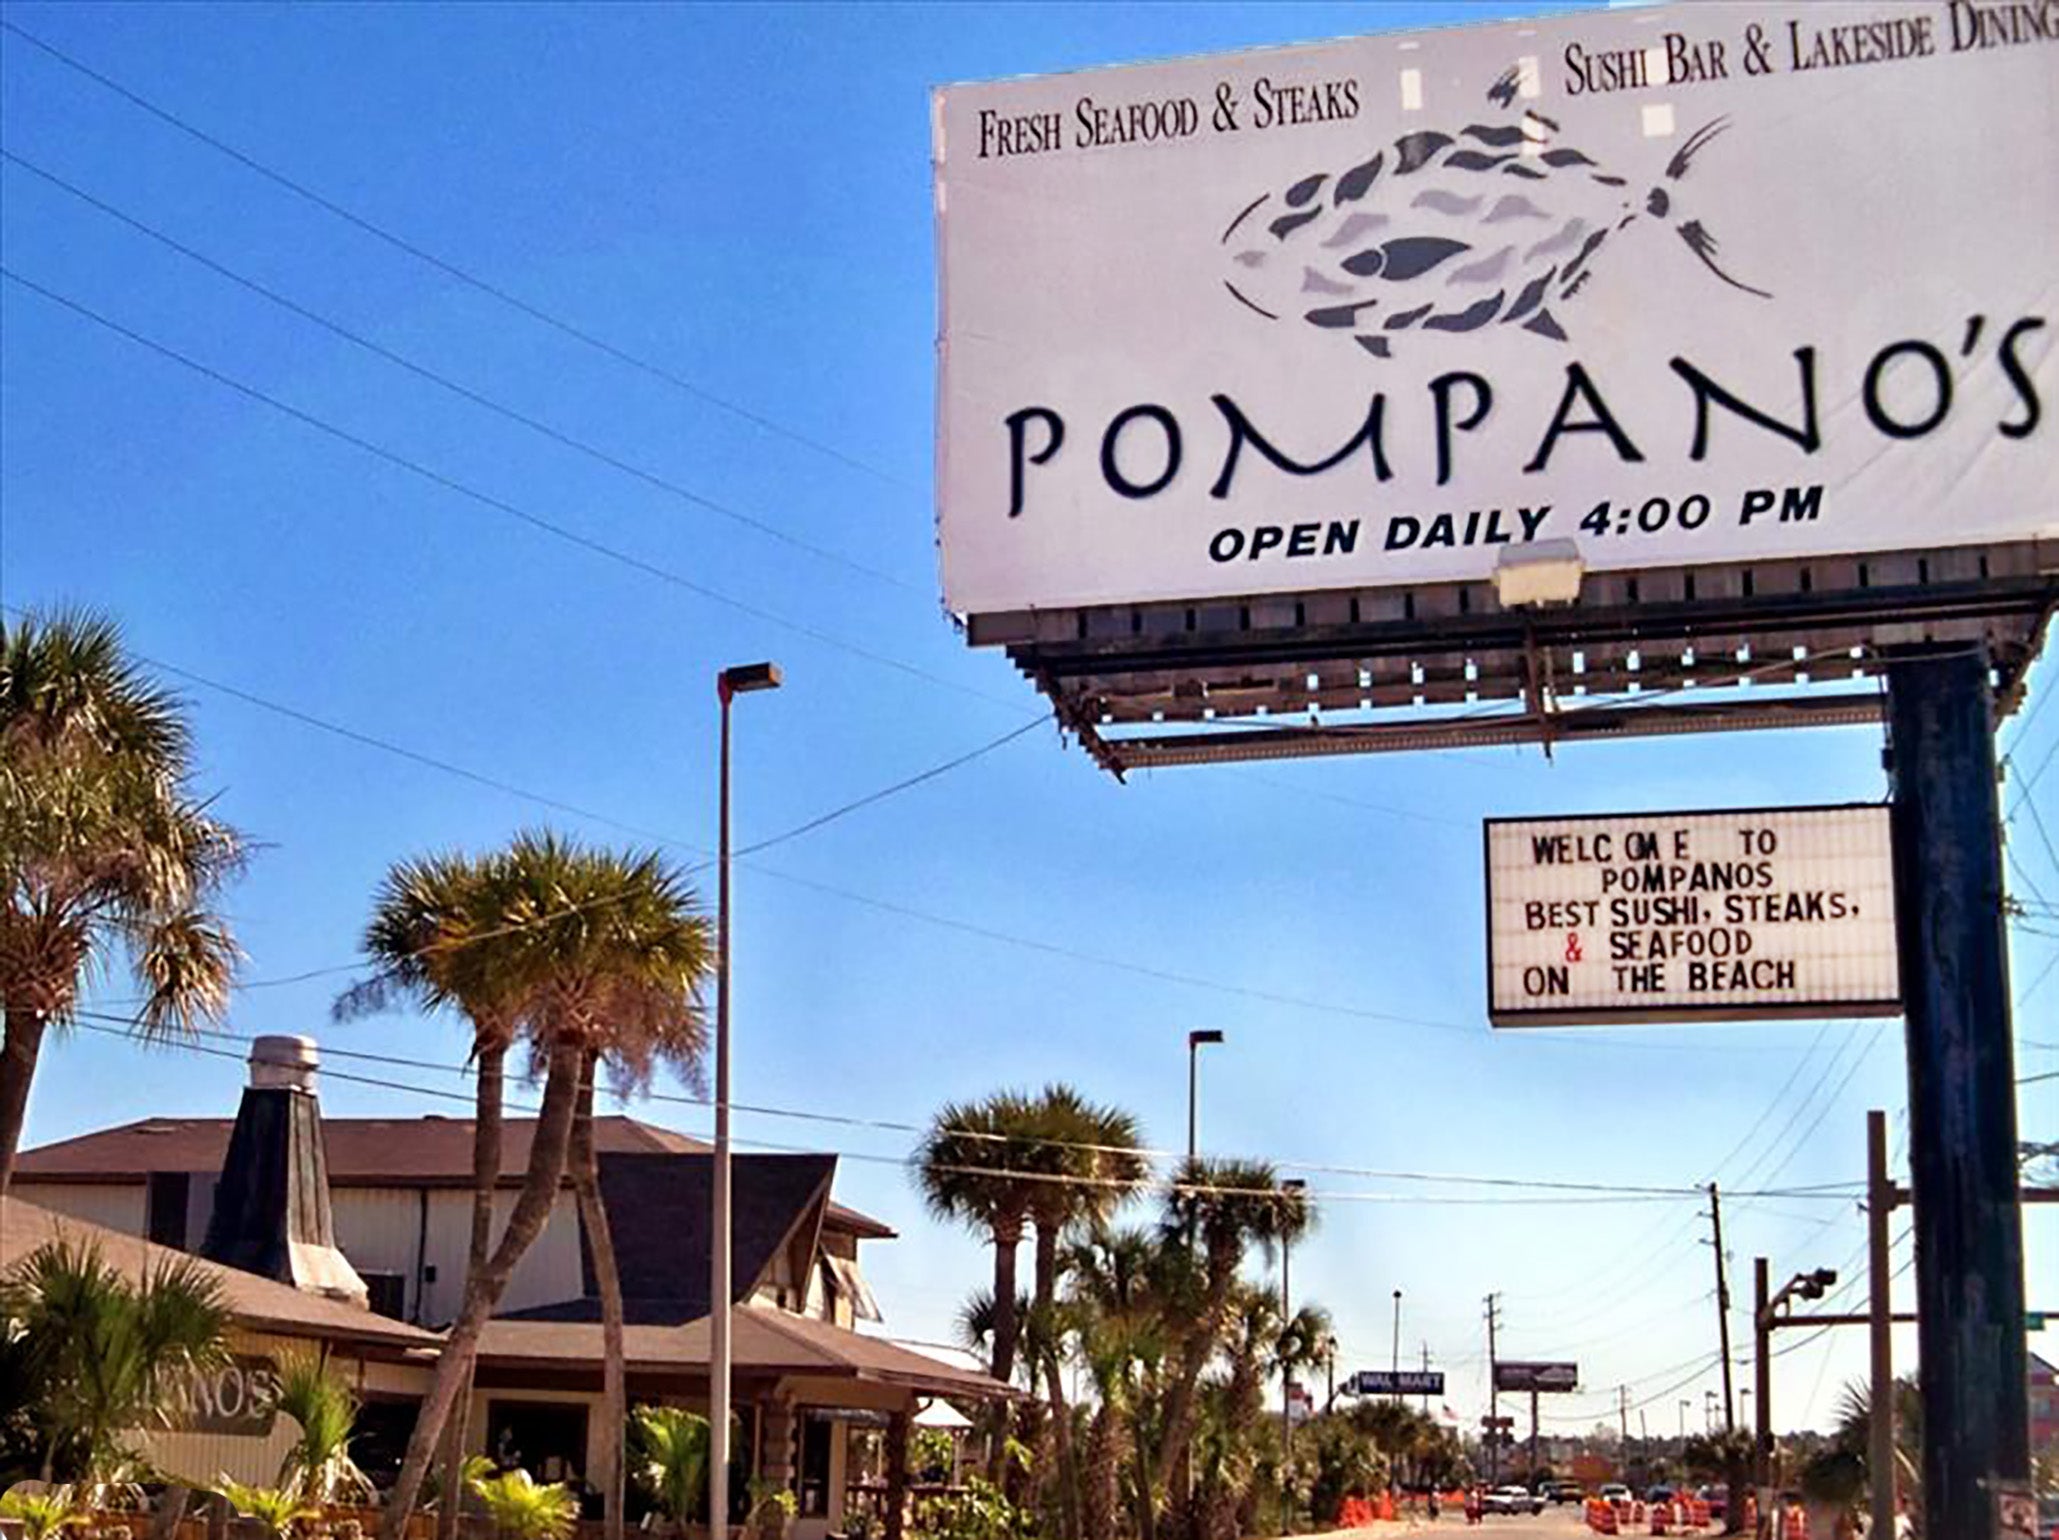 Walk on over to Pompanos!